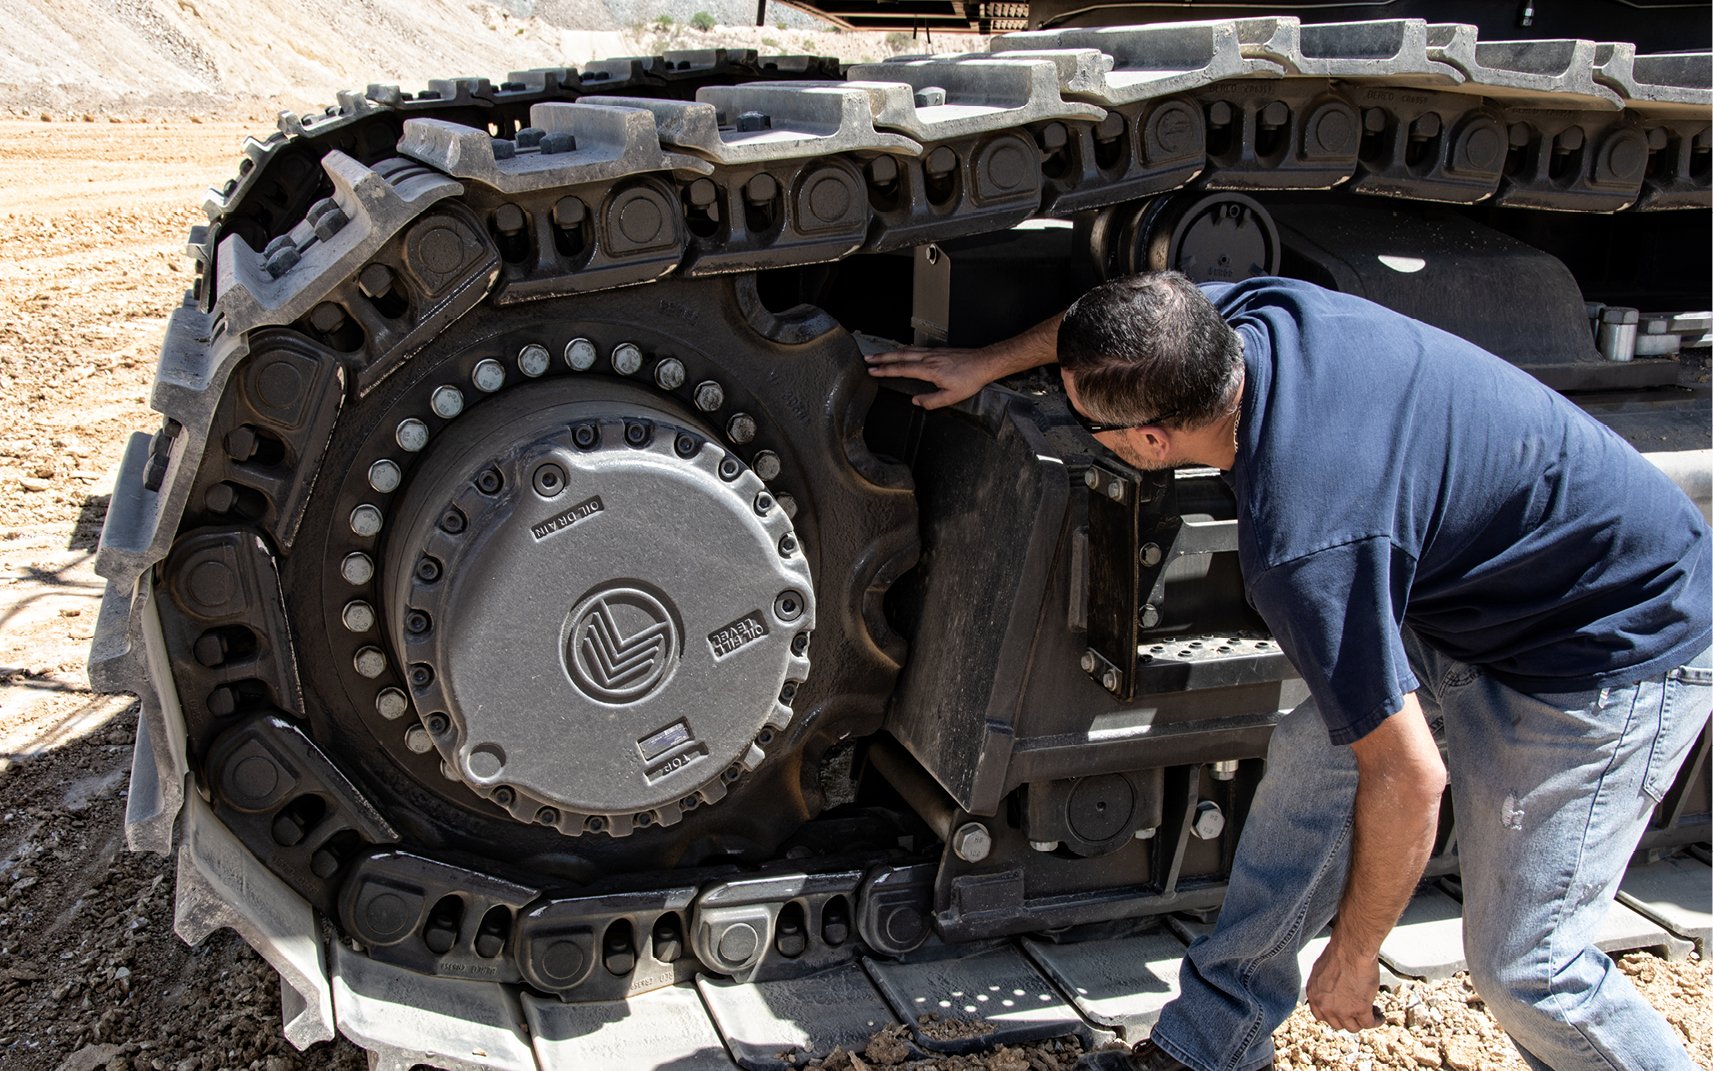 An operator inspecting the undercarriage of a large crawler excavator.